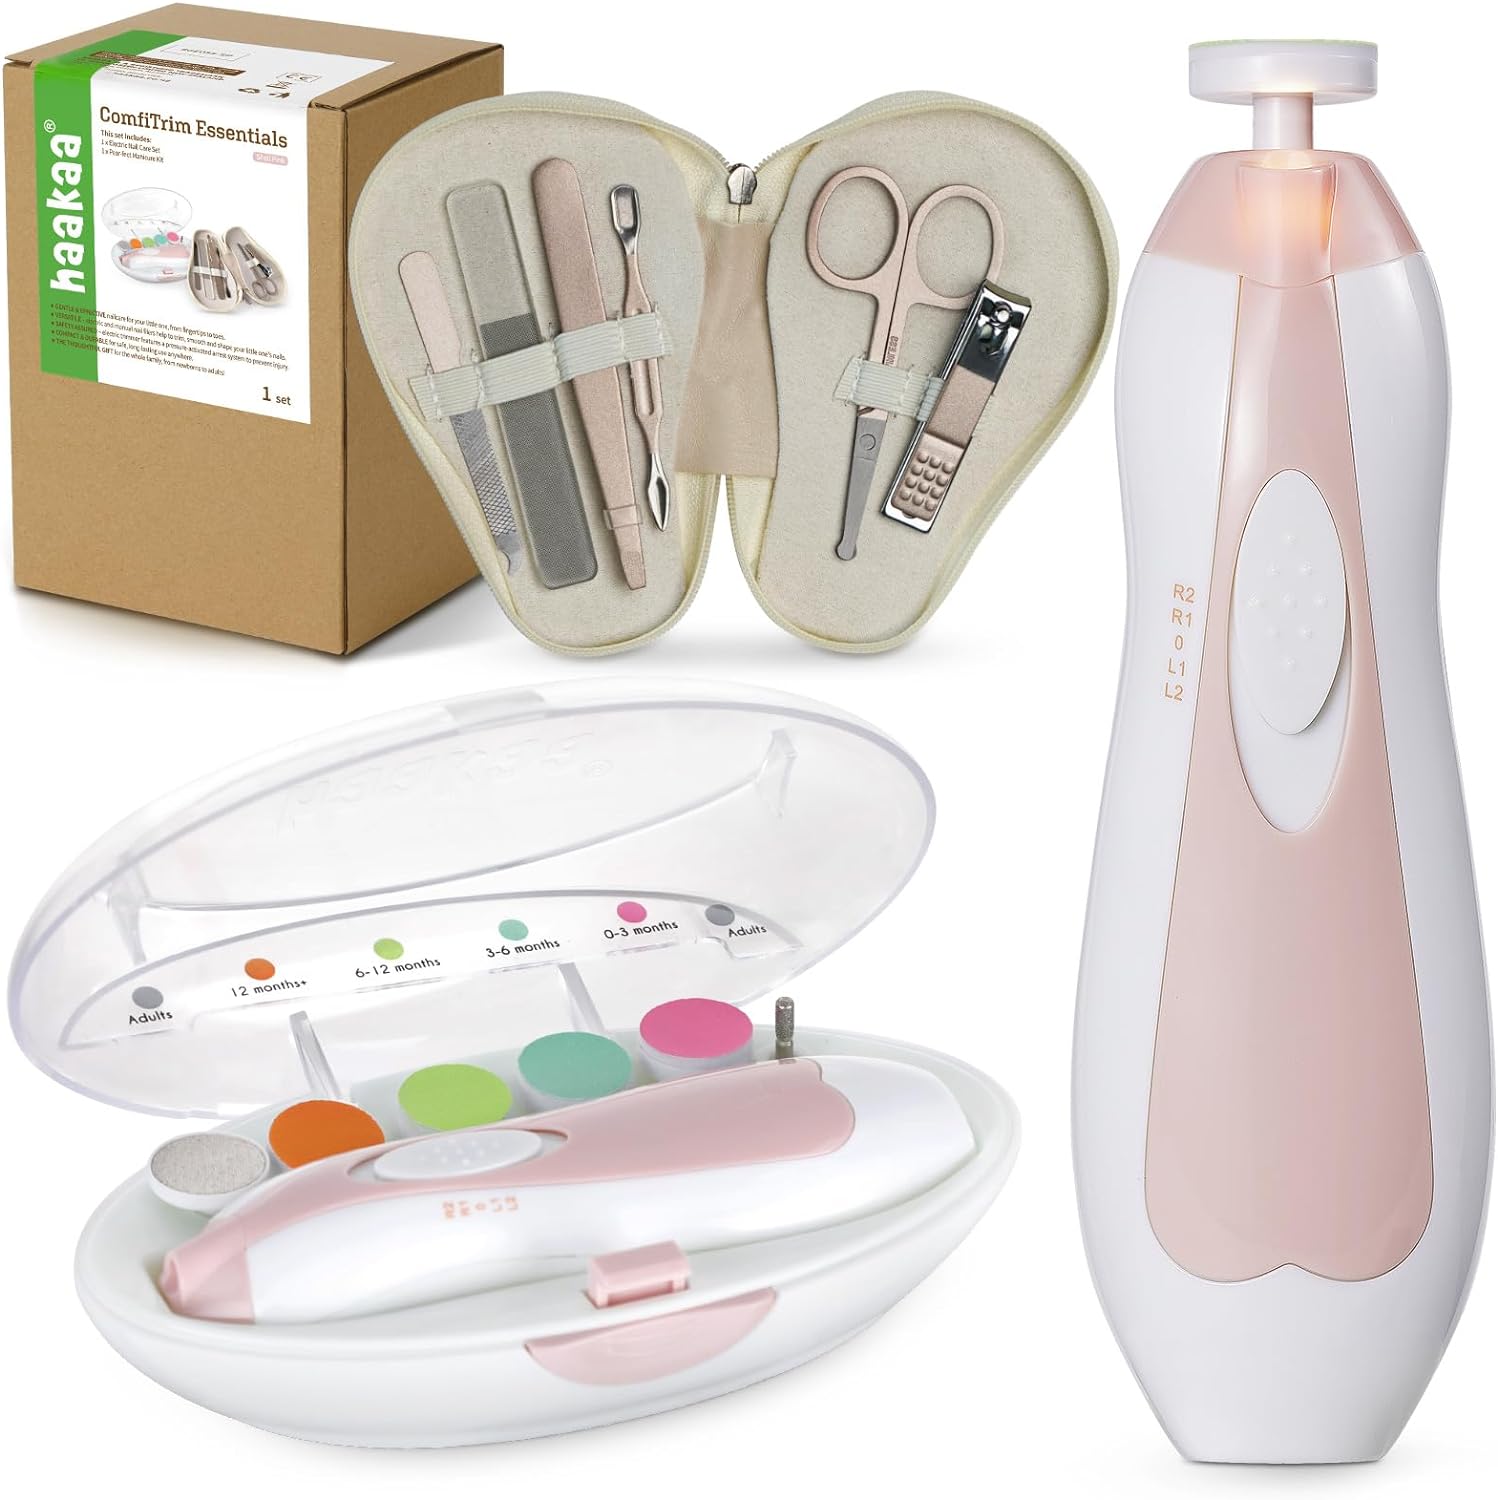 haakaa Electric Nail Care Set & Pear-FECT Manicure Kit, Baby Nail Clippers Kit for Newborns, Toddlers or Adults – Fingernail and Toenail Care, Baby Healthcare and Grooming Kit in Shell Pink